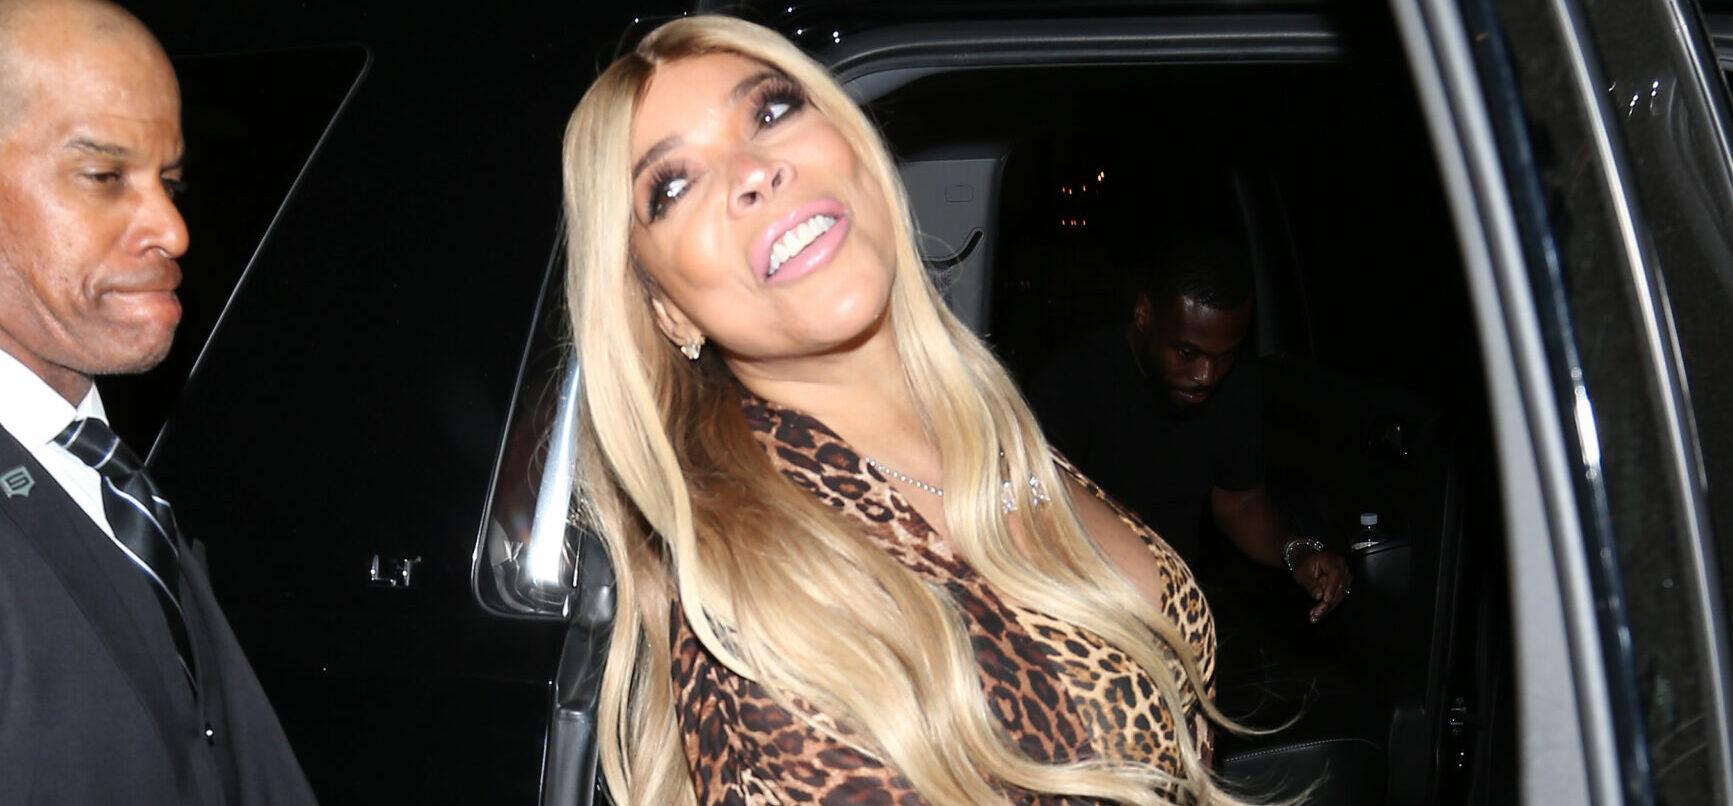 Wendy Williams Spotted Drinking At A New York Gay Bar After Her Rehab Stint